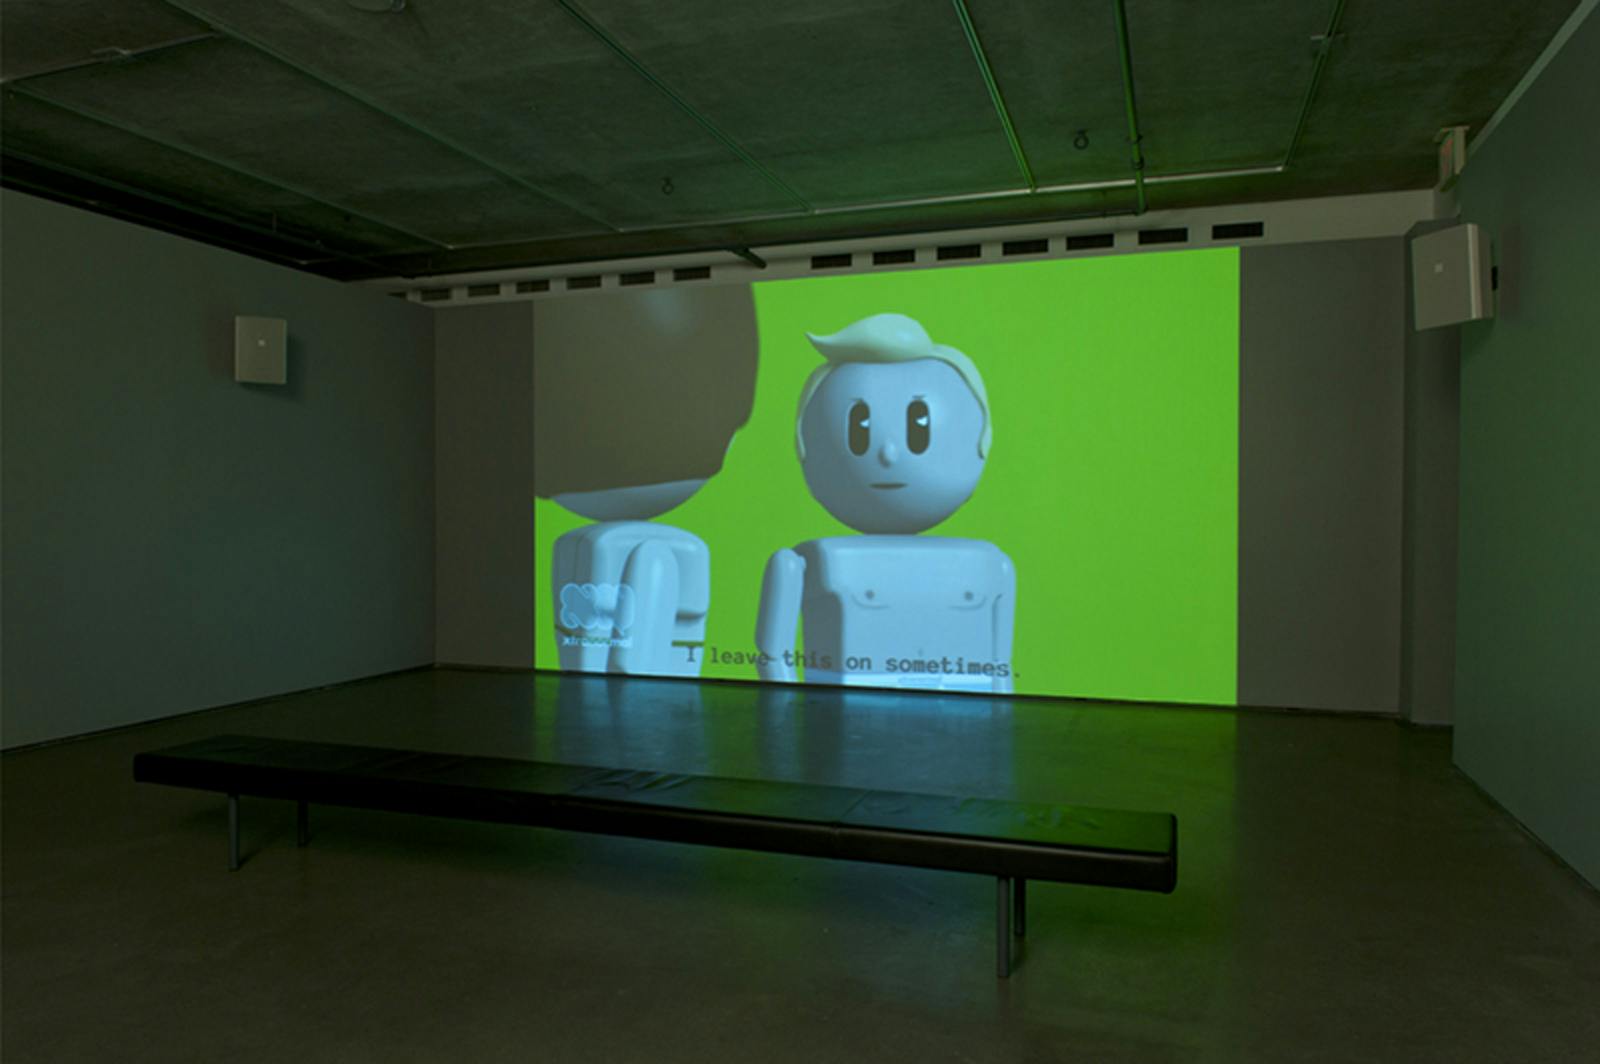 A single-channel video is projected on a wall in a darkened gallery space. The scene depicts a toy-like, animated man speaking “I leave this on sometimes” to another character, a toy-like woman.